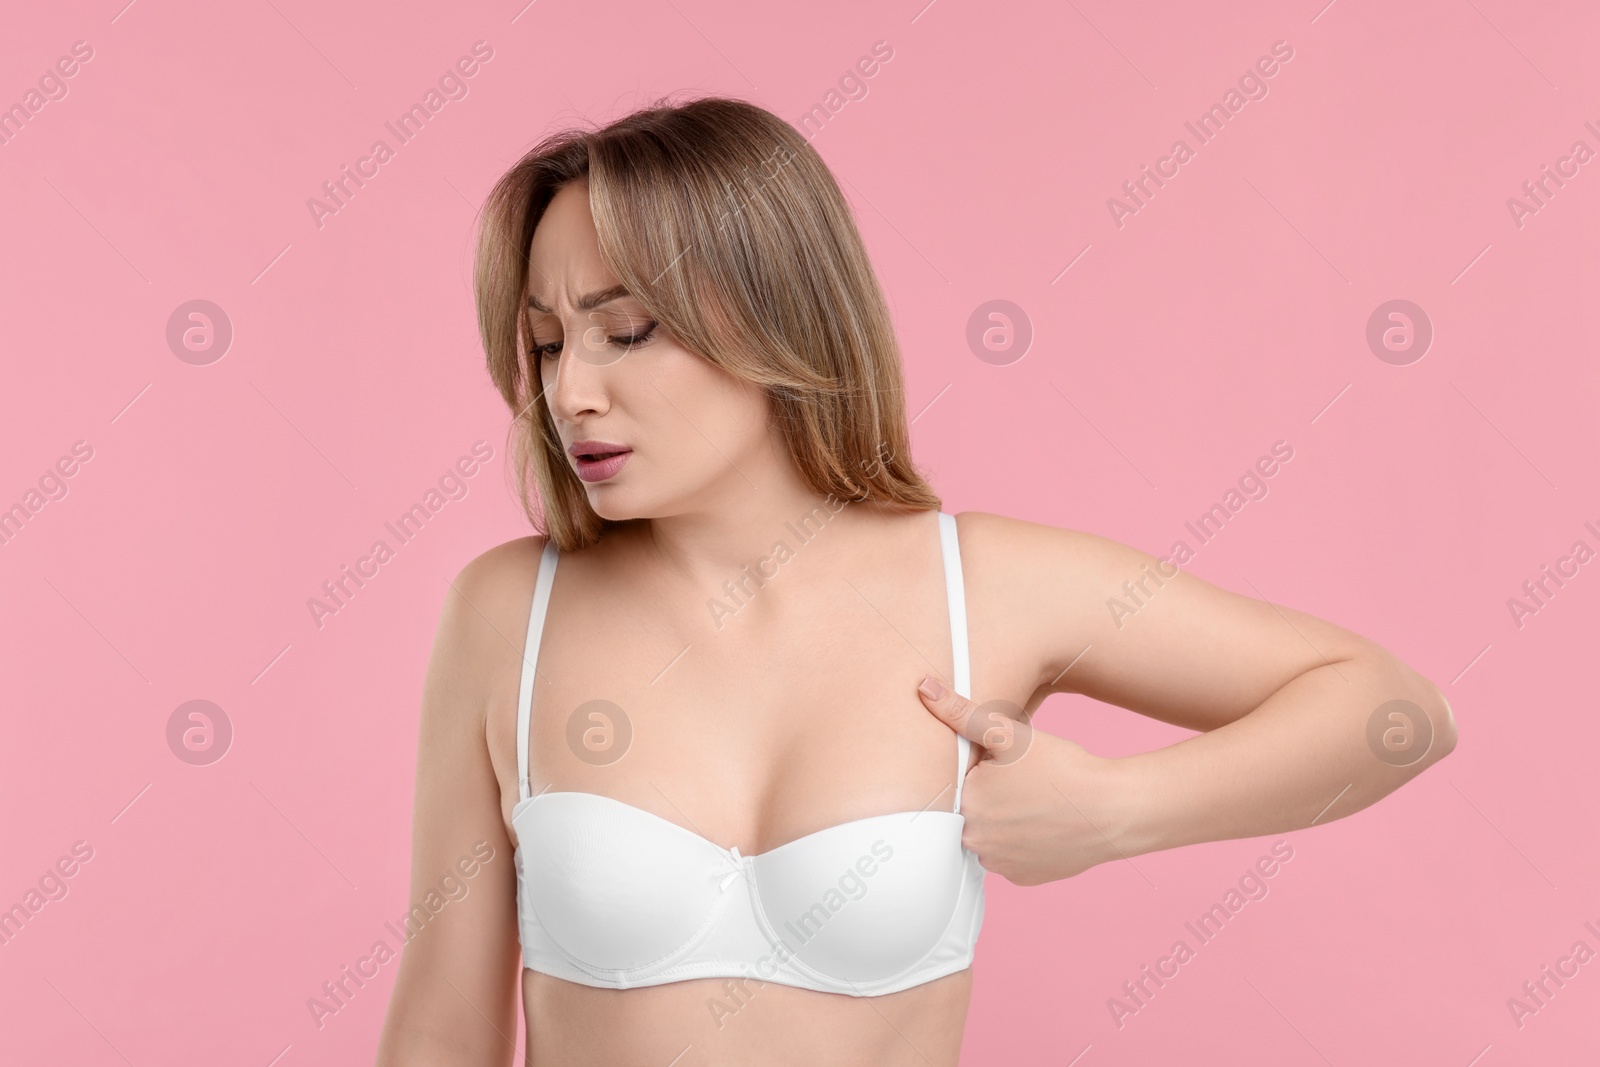 Photo of Mammology. Young woman doing breast self-examination on pink background